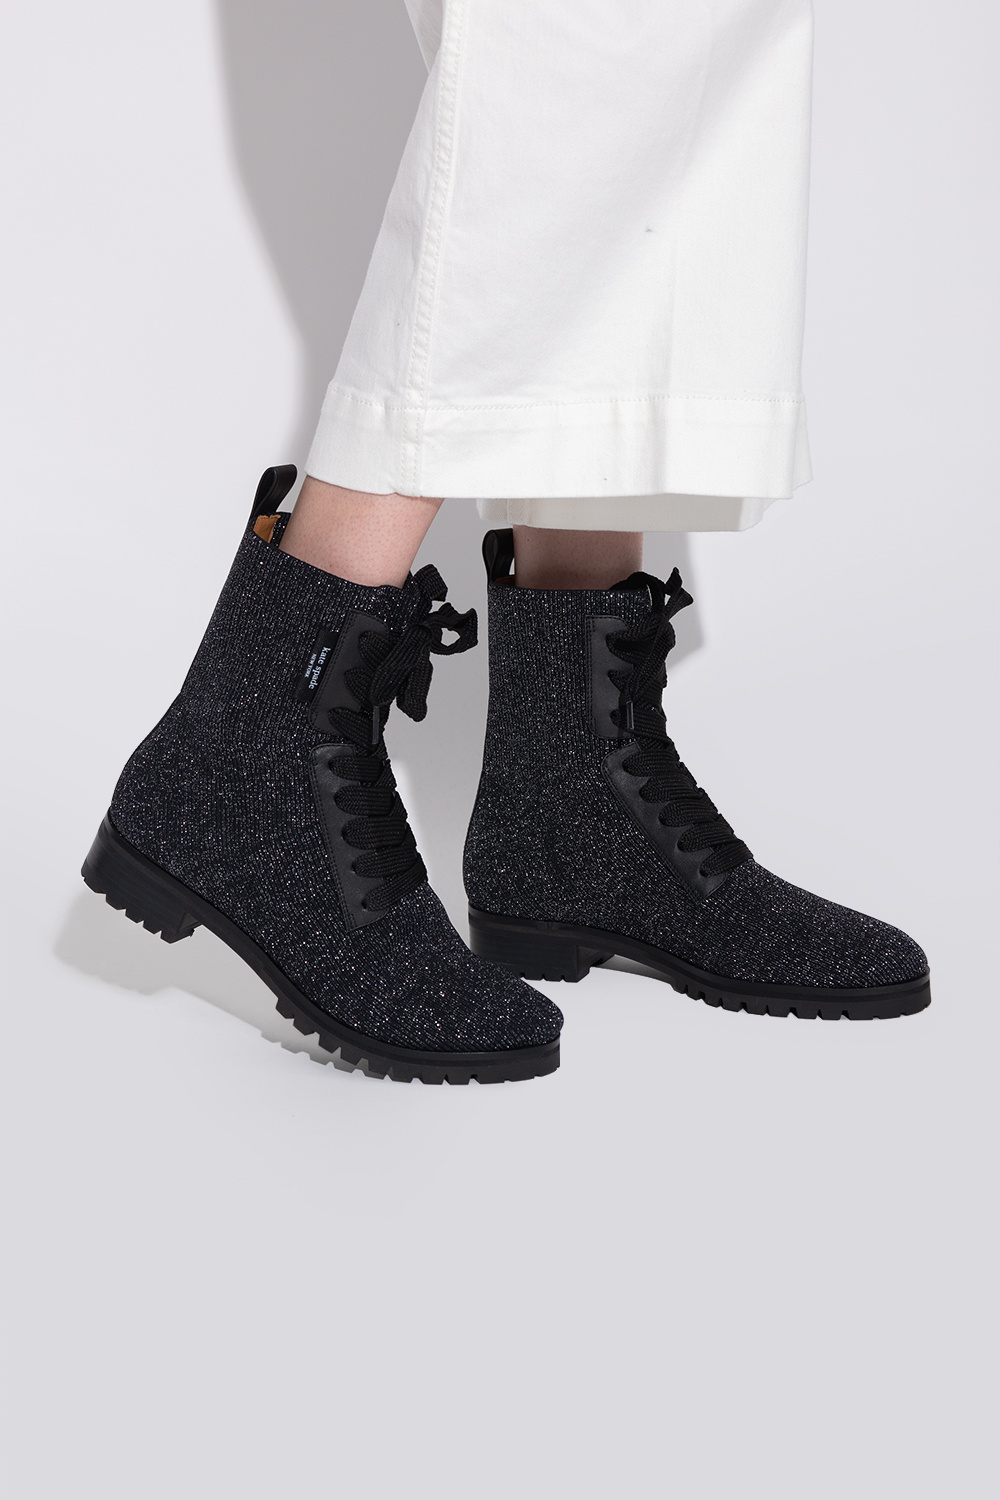 Kate Spade ‘Merigue’ ankle boots